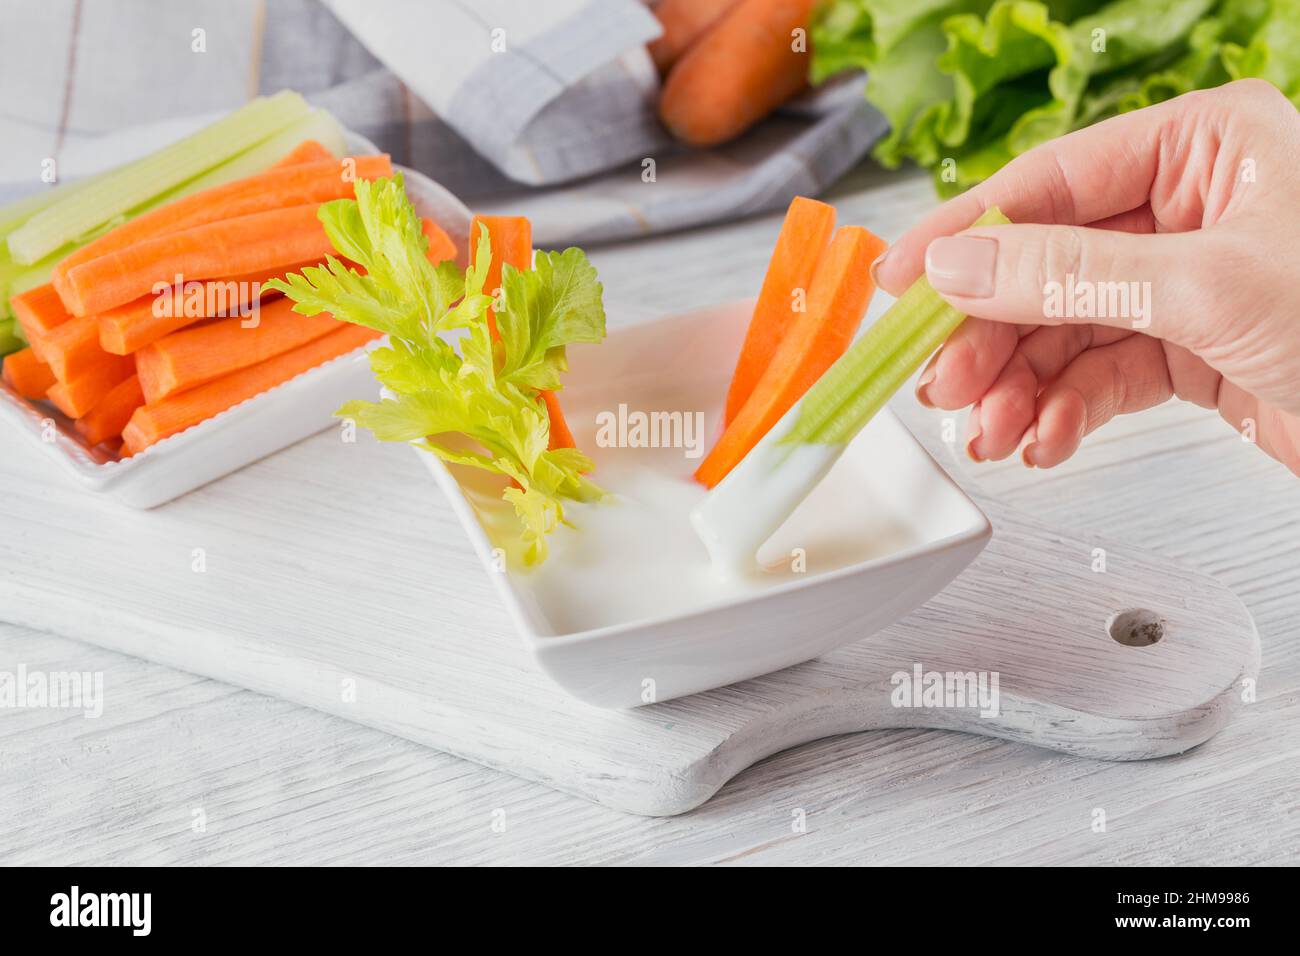 Vegetable sticks. Fresh celery and carrot with yogurt sauce. Woman's Hand holding celery stick. Healthy and diet food concept. Stock Photo